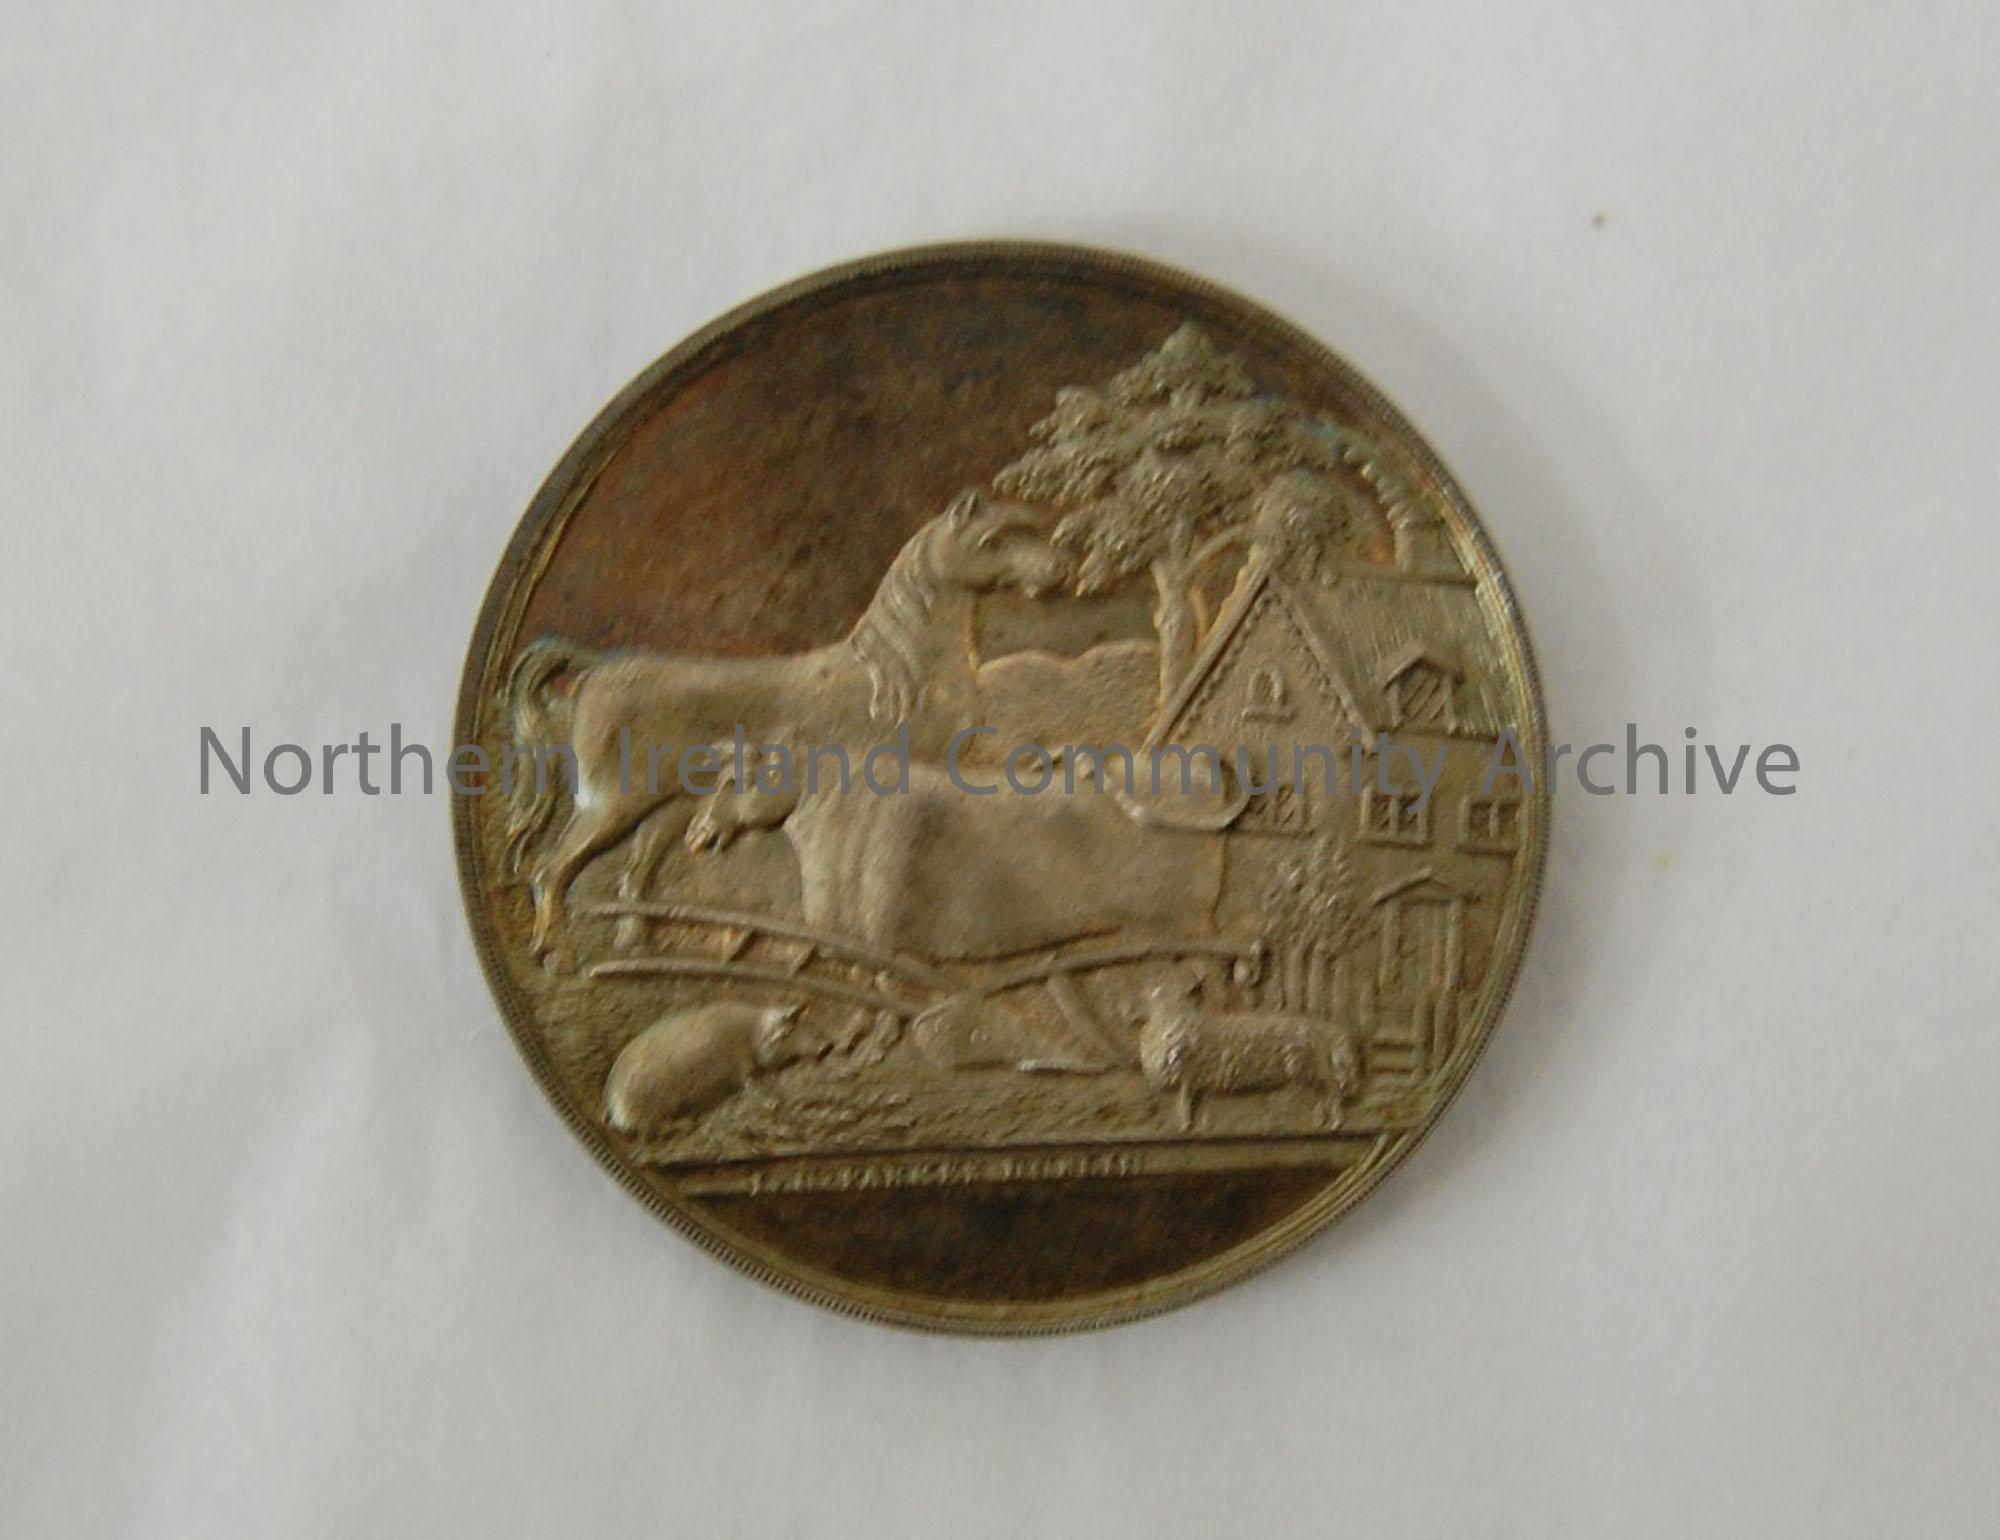 Route Farming Society medal. Awarded to Mr. Andrew Hunter, Corstown. For the best two year old heifer, 1851. Inset in wooden box with red felt.